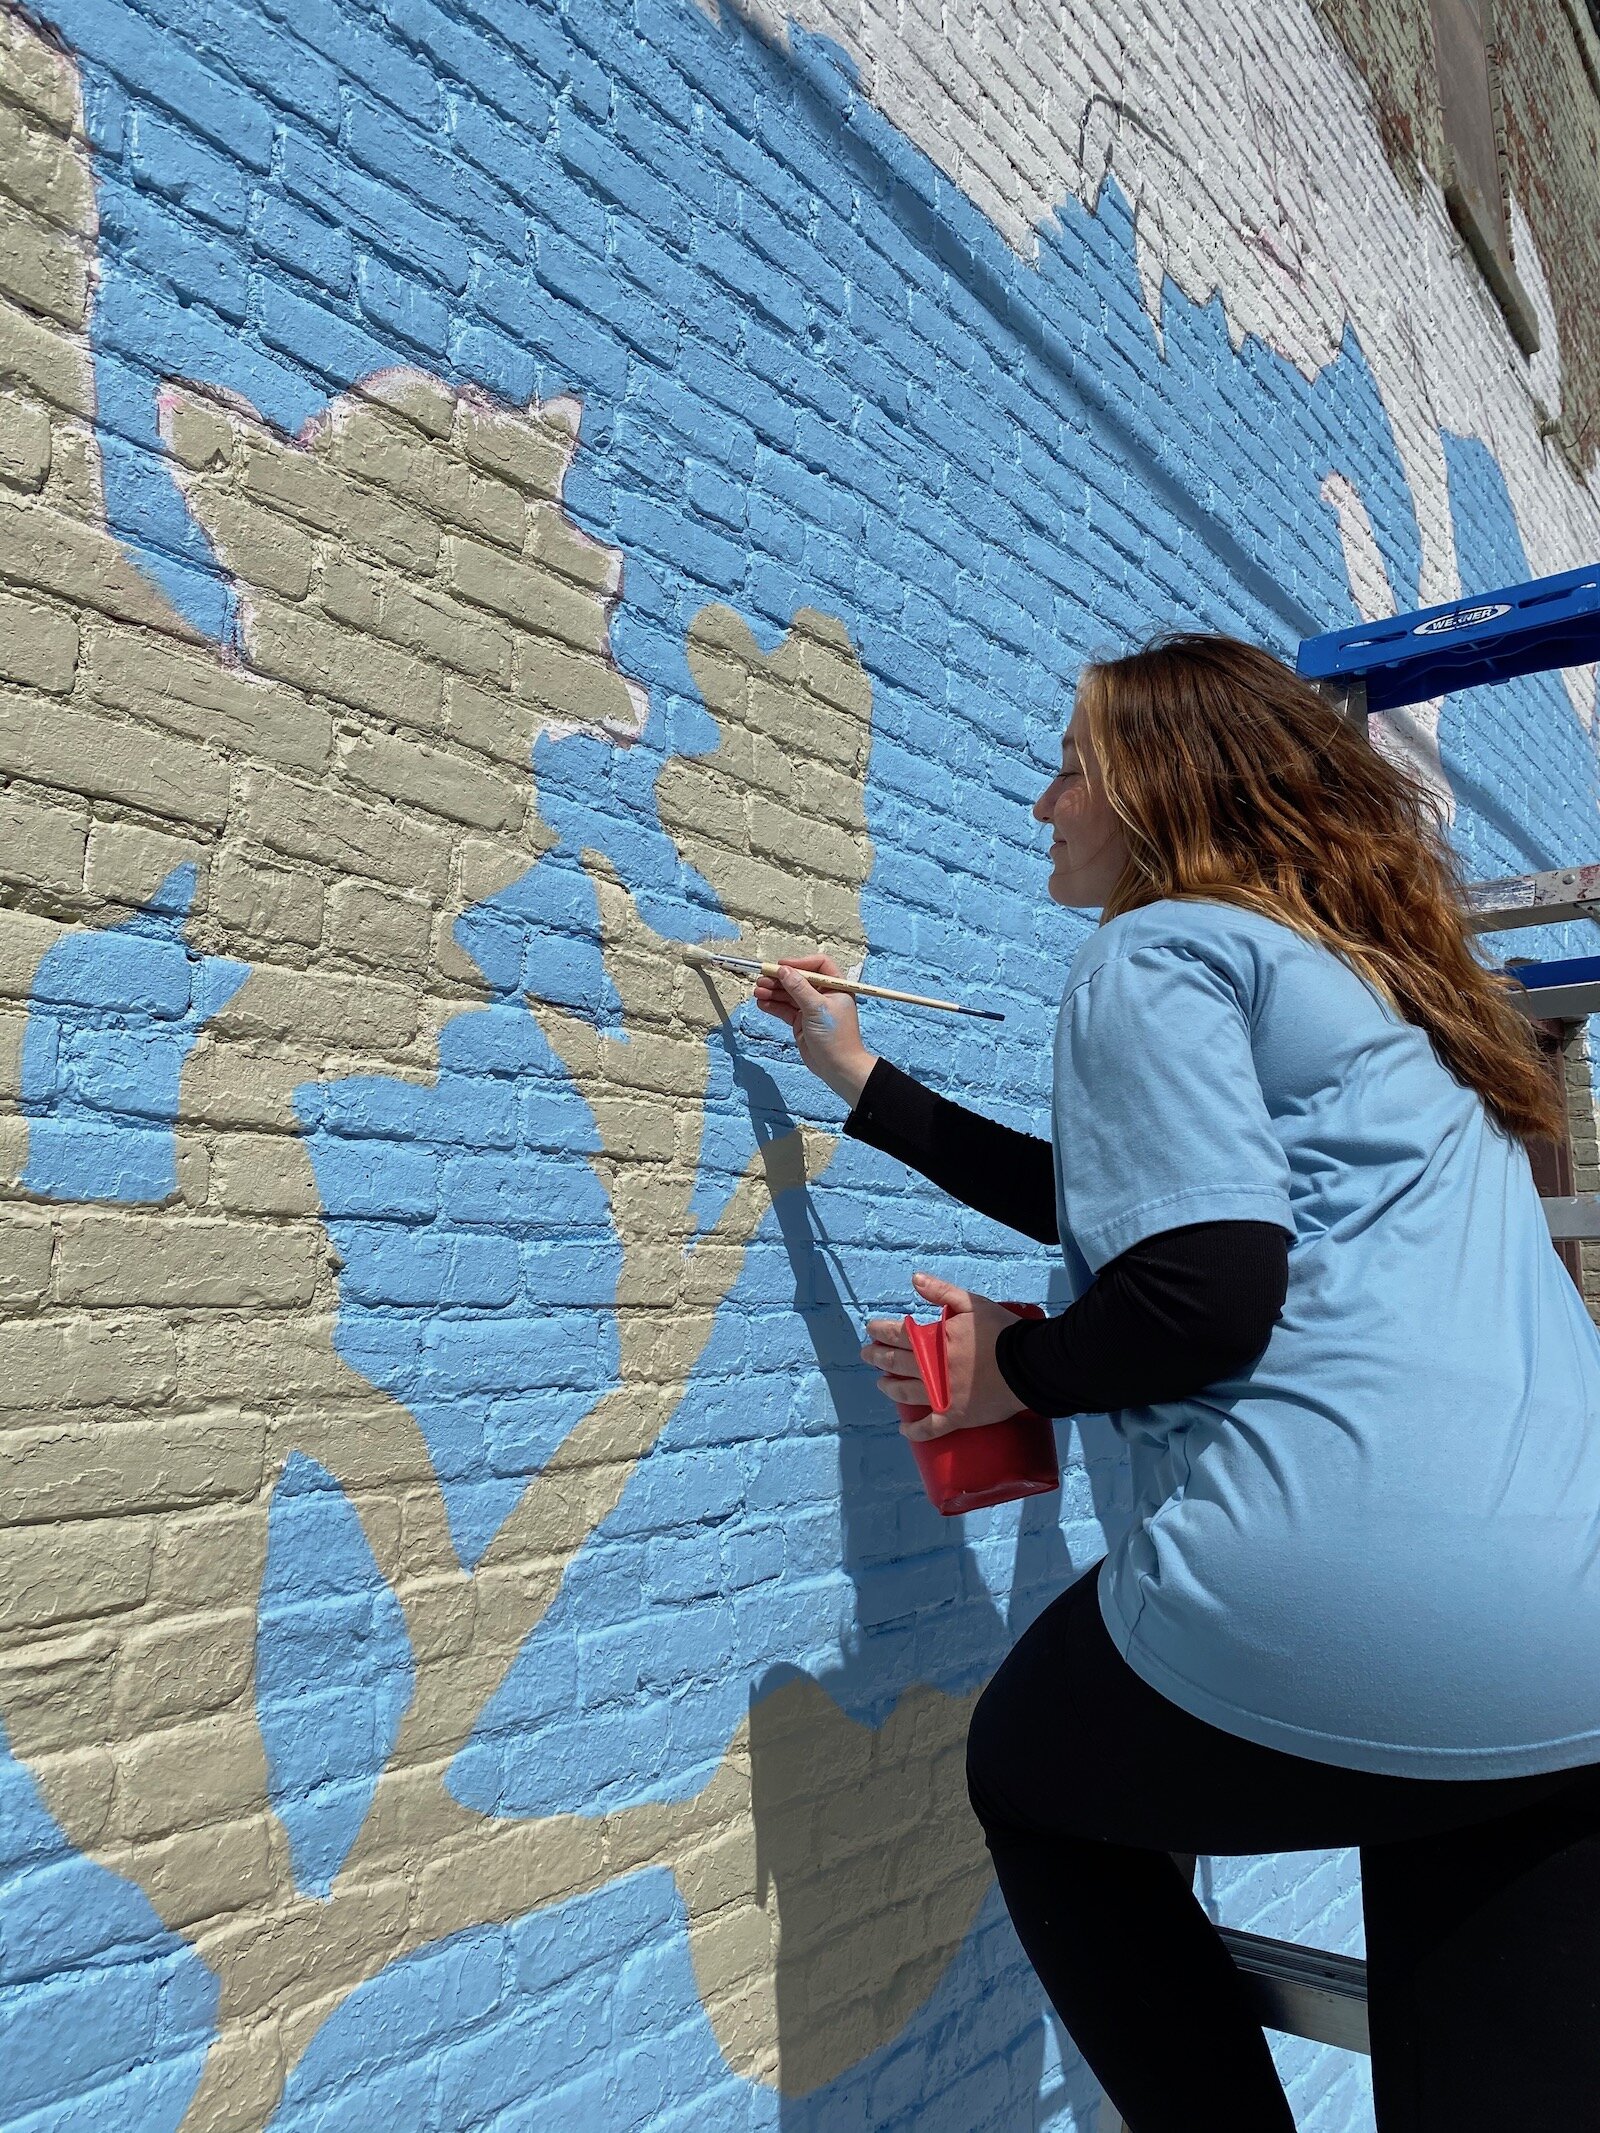 USF’s Mural Painting and Public Art Class works on a mural in downtown Fort Wayne at 1217 Broadway.